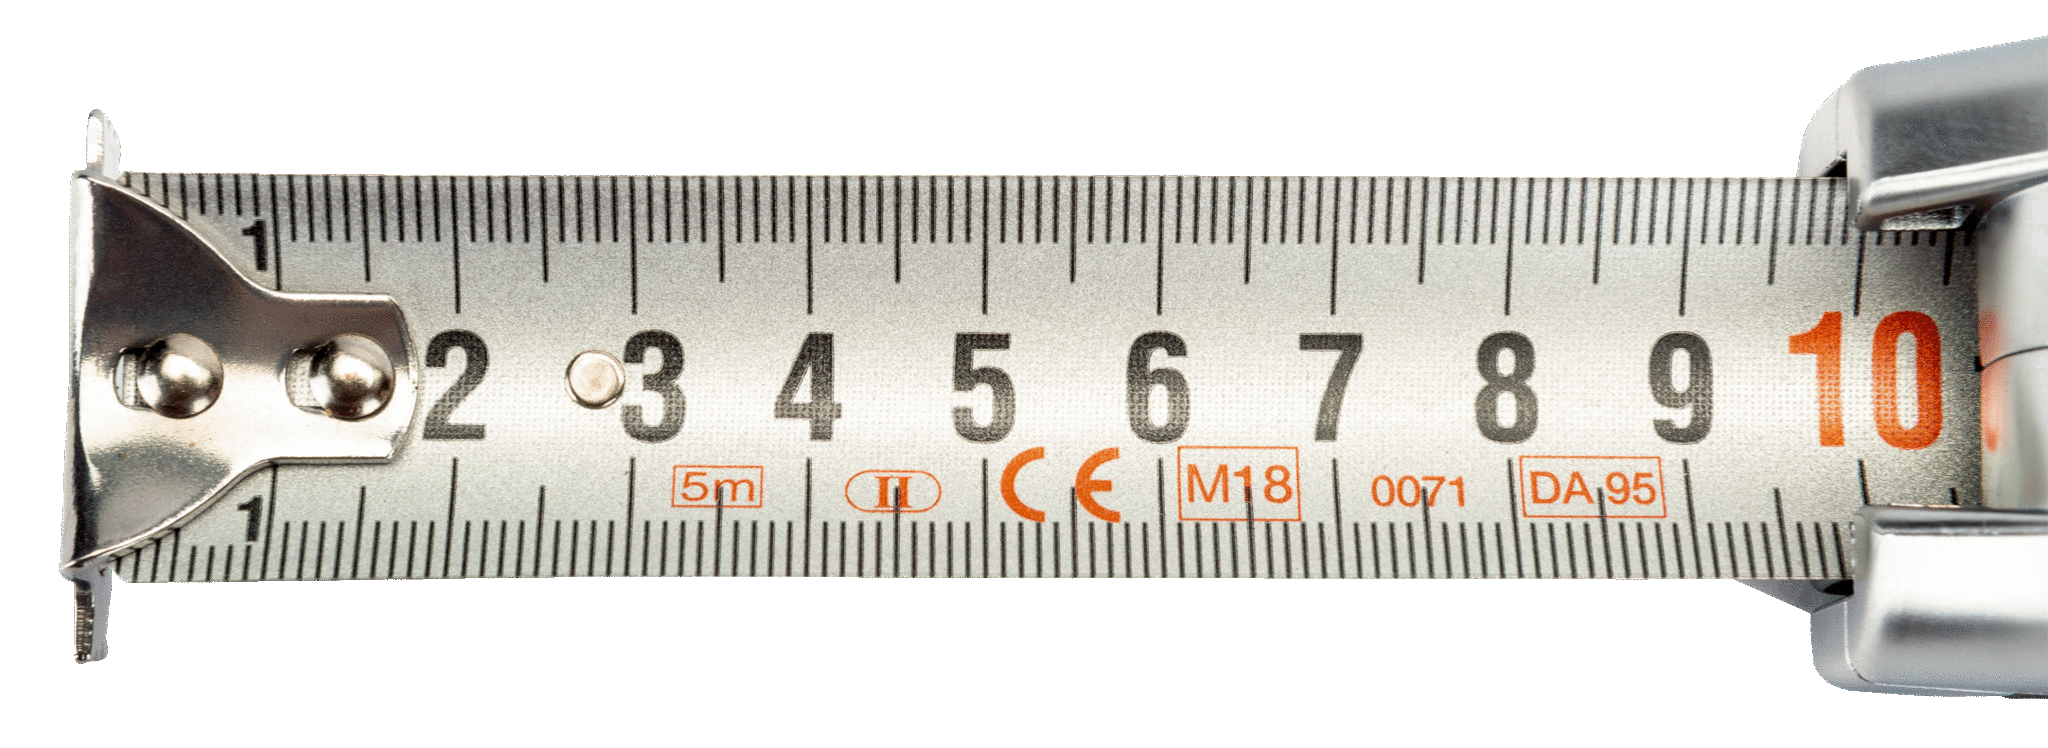 Double-Sided Tape Measures with Rubber Grip by Bahco